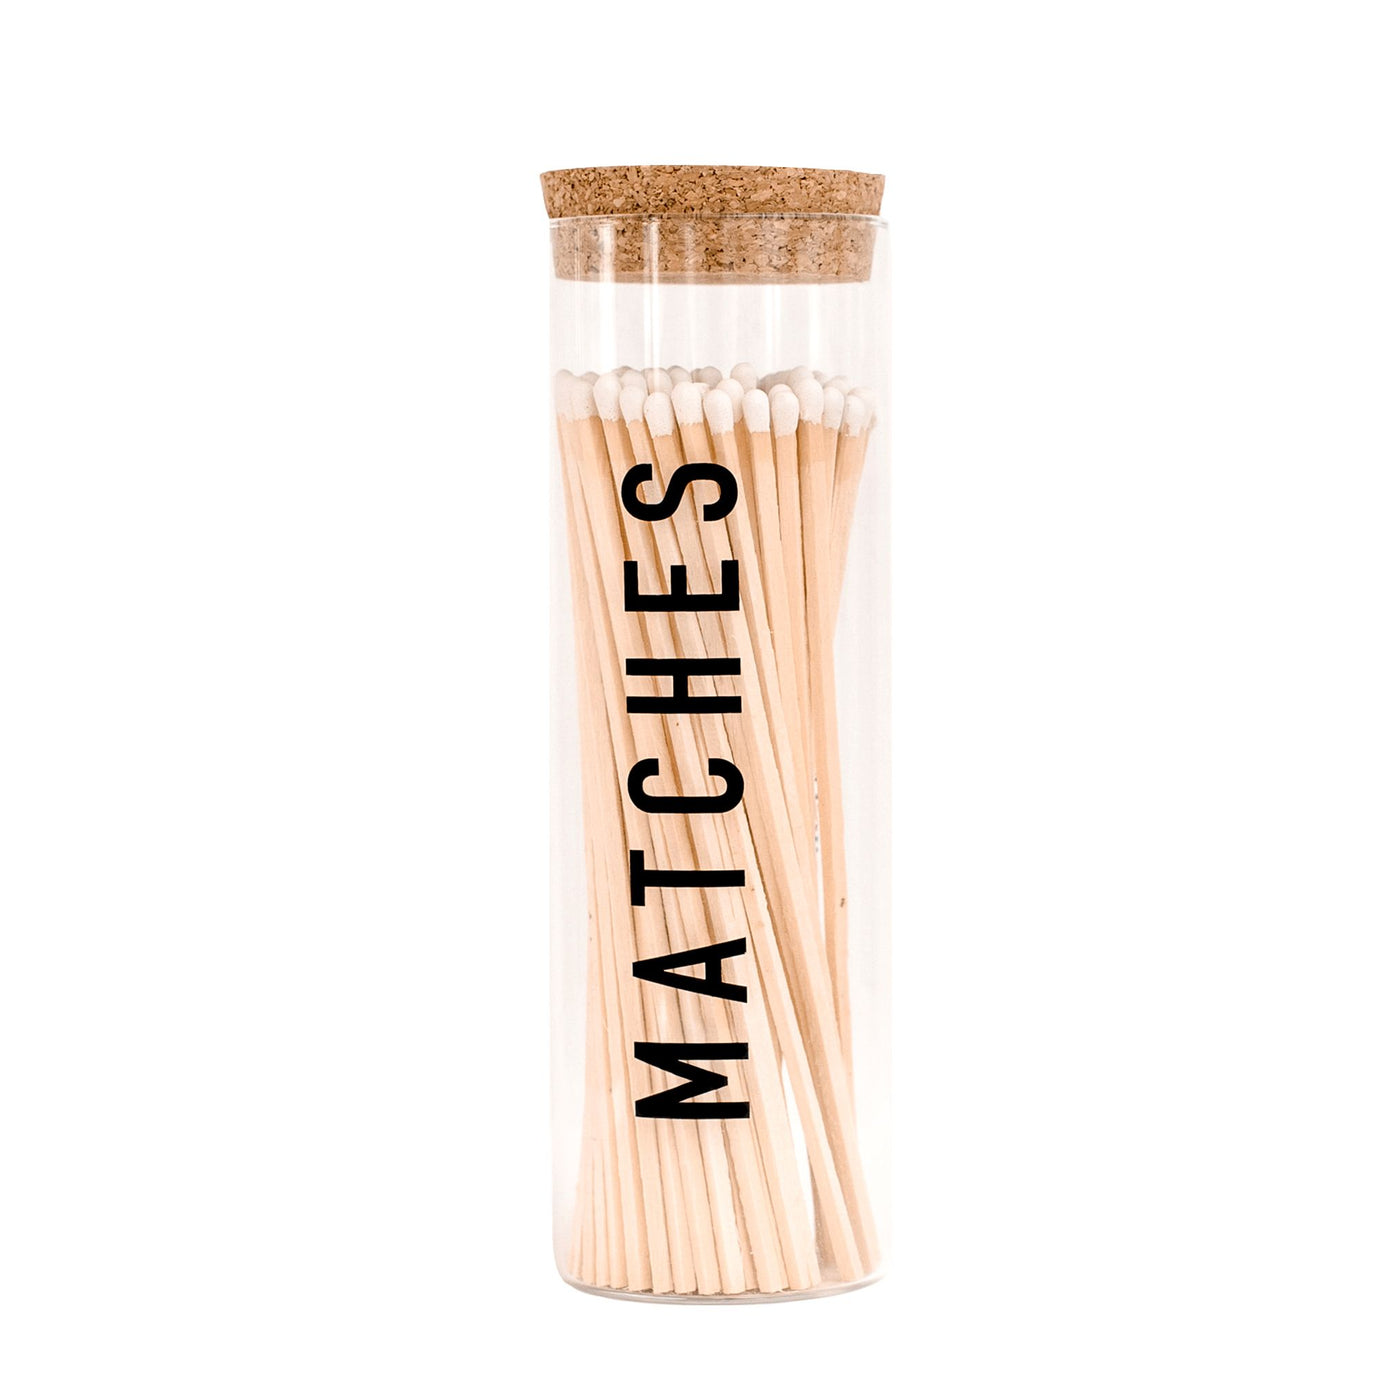 White Tip Hearth Matches - 80 Count, 7"